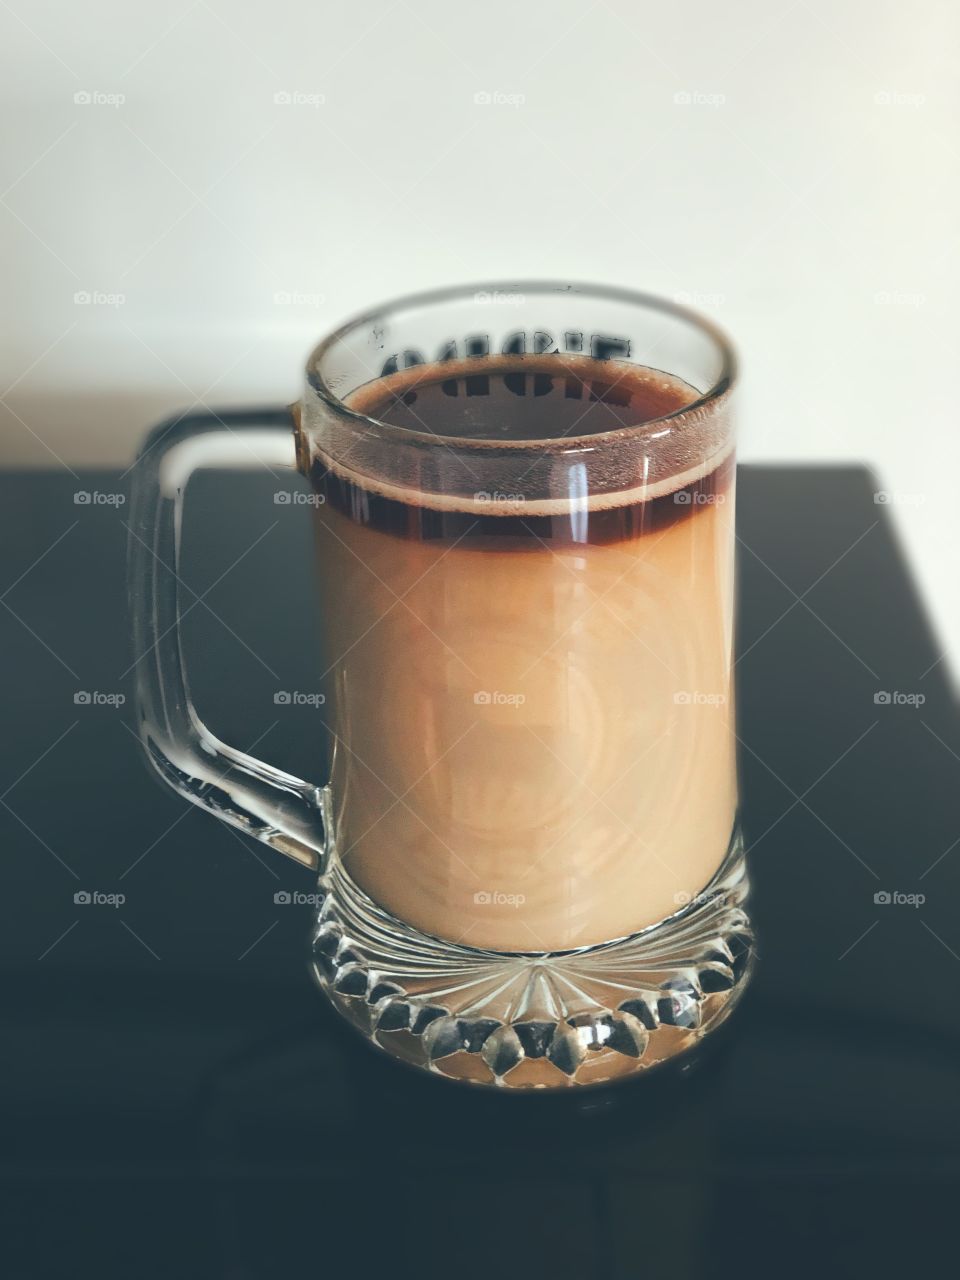 French Press Homemade Coffee In A Glass Mug, Food Photography